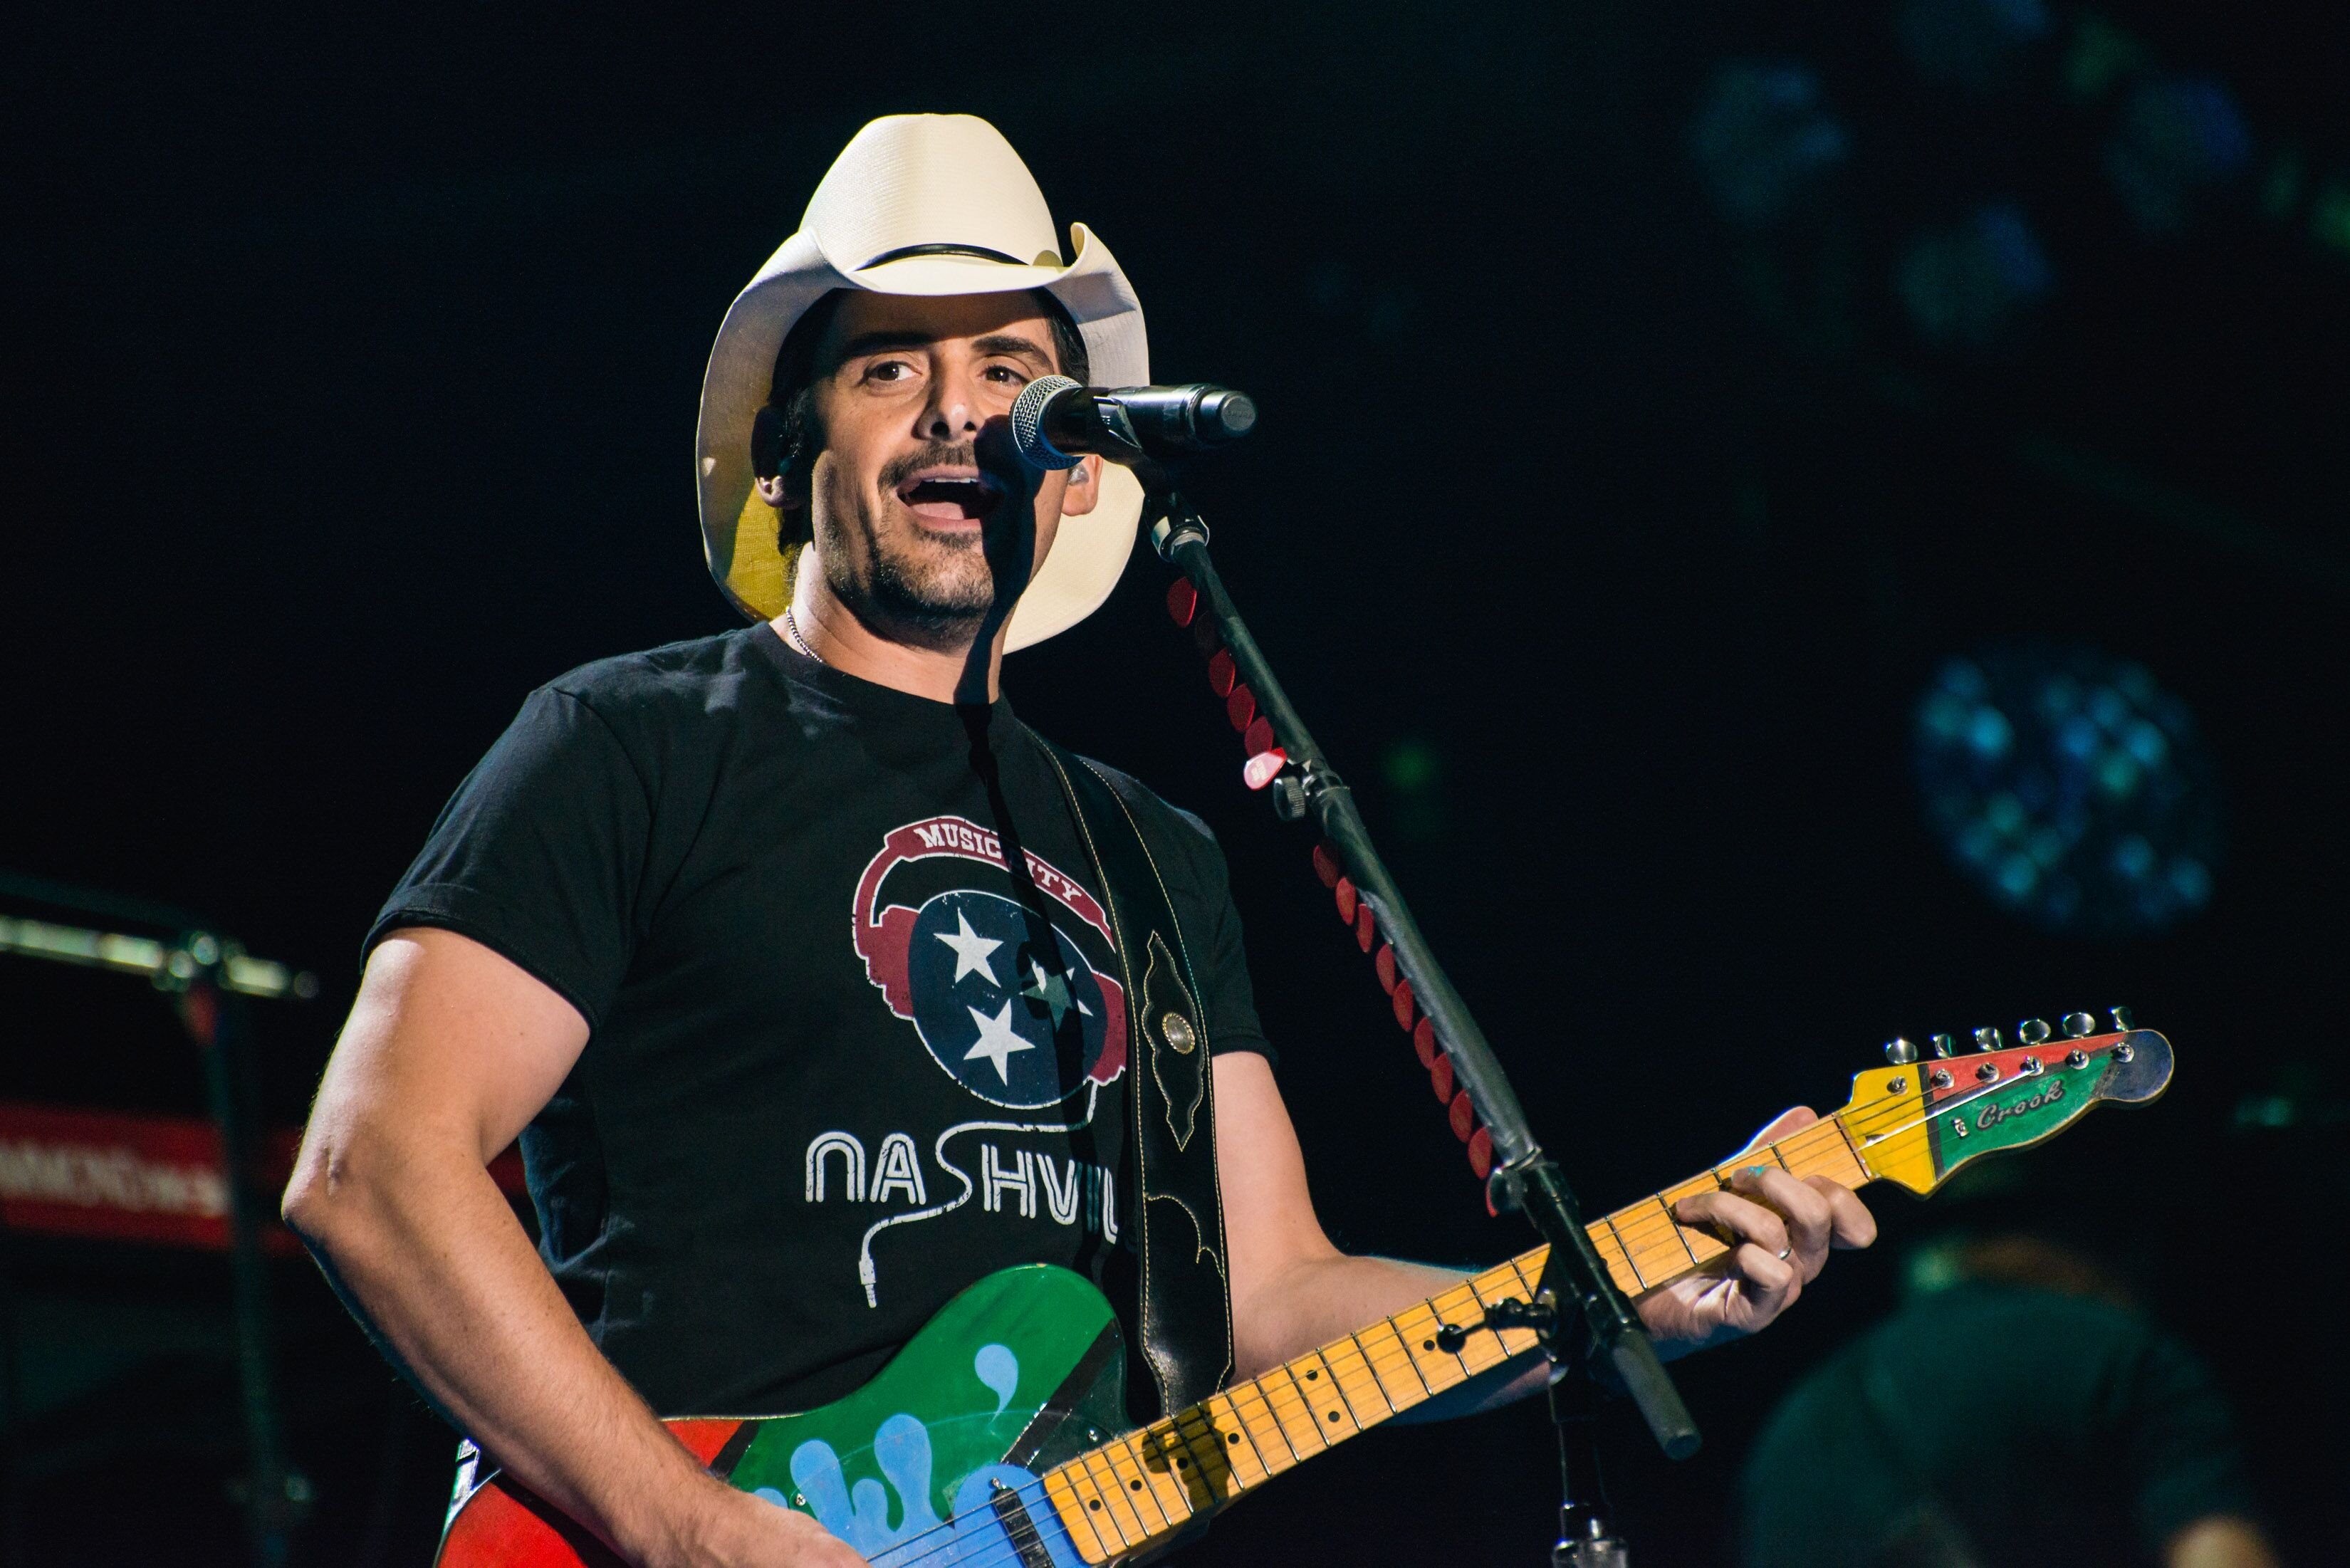  Brad Paisley performs at Nissan Stadium during day 4 of the 2017 CMA Music Festival on June 11, 2017 in Nashville, Tennessee | Photo: Getty Images